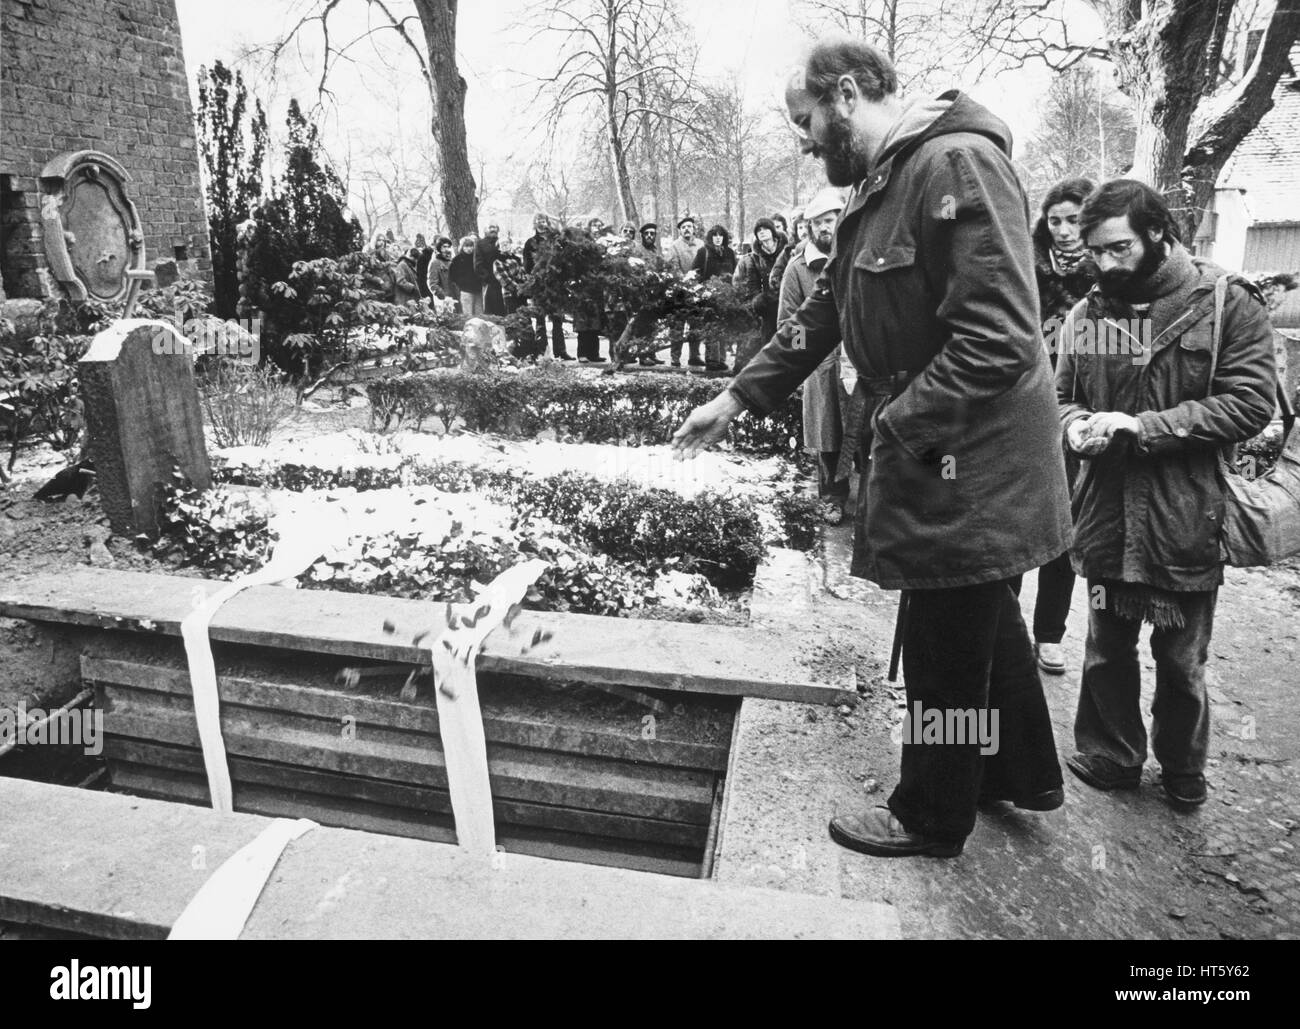 Berlin, January 3, 1980 - Burial of RUDI DUTSCHKE (* 7. März 1940; † 24. Dezember 1979) at the St.-Annen cemetery in Berlin-Dahlem. Rudi Dutschke was the most prominent spokesperson of the German student movement of the 1960s. Horst Mahler (front) at the open grave Stock Photo